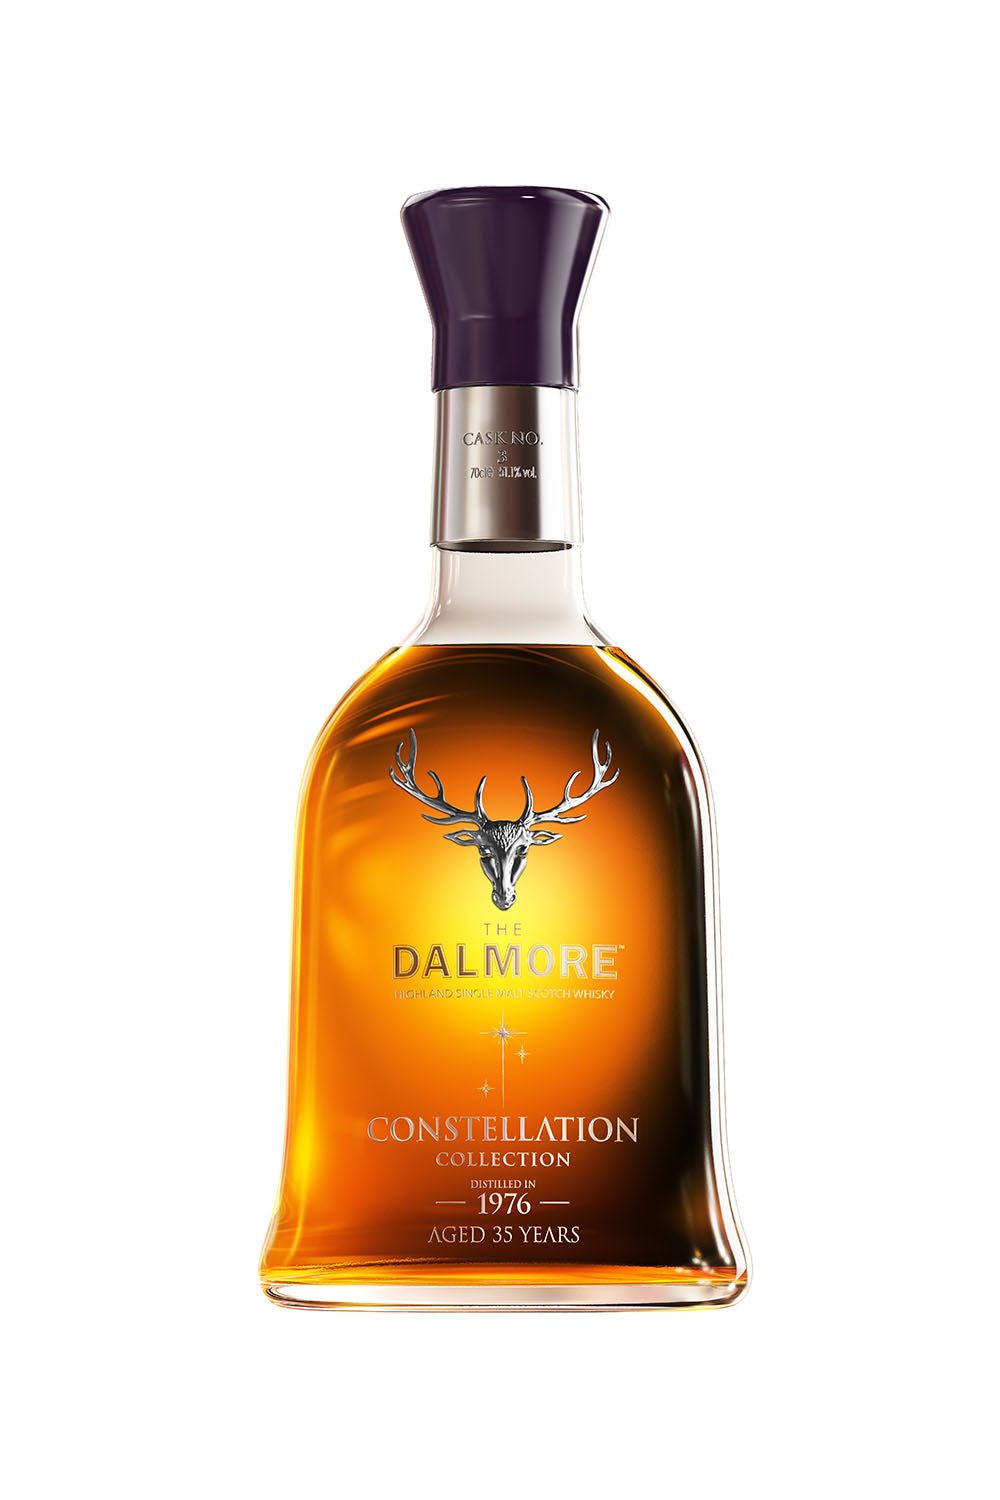 The Dalmore 1976 Constellation - Cask 3